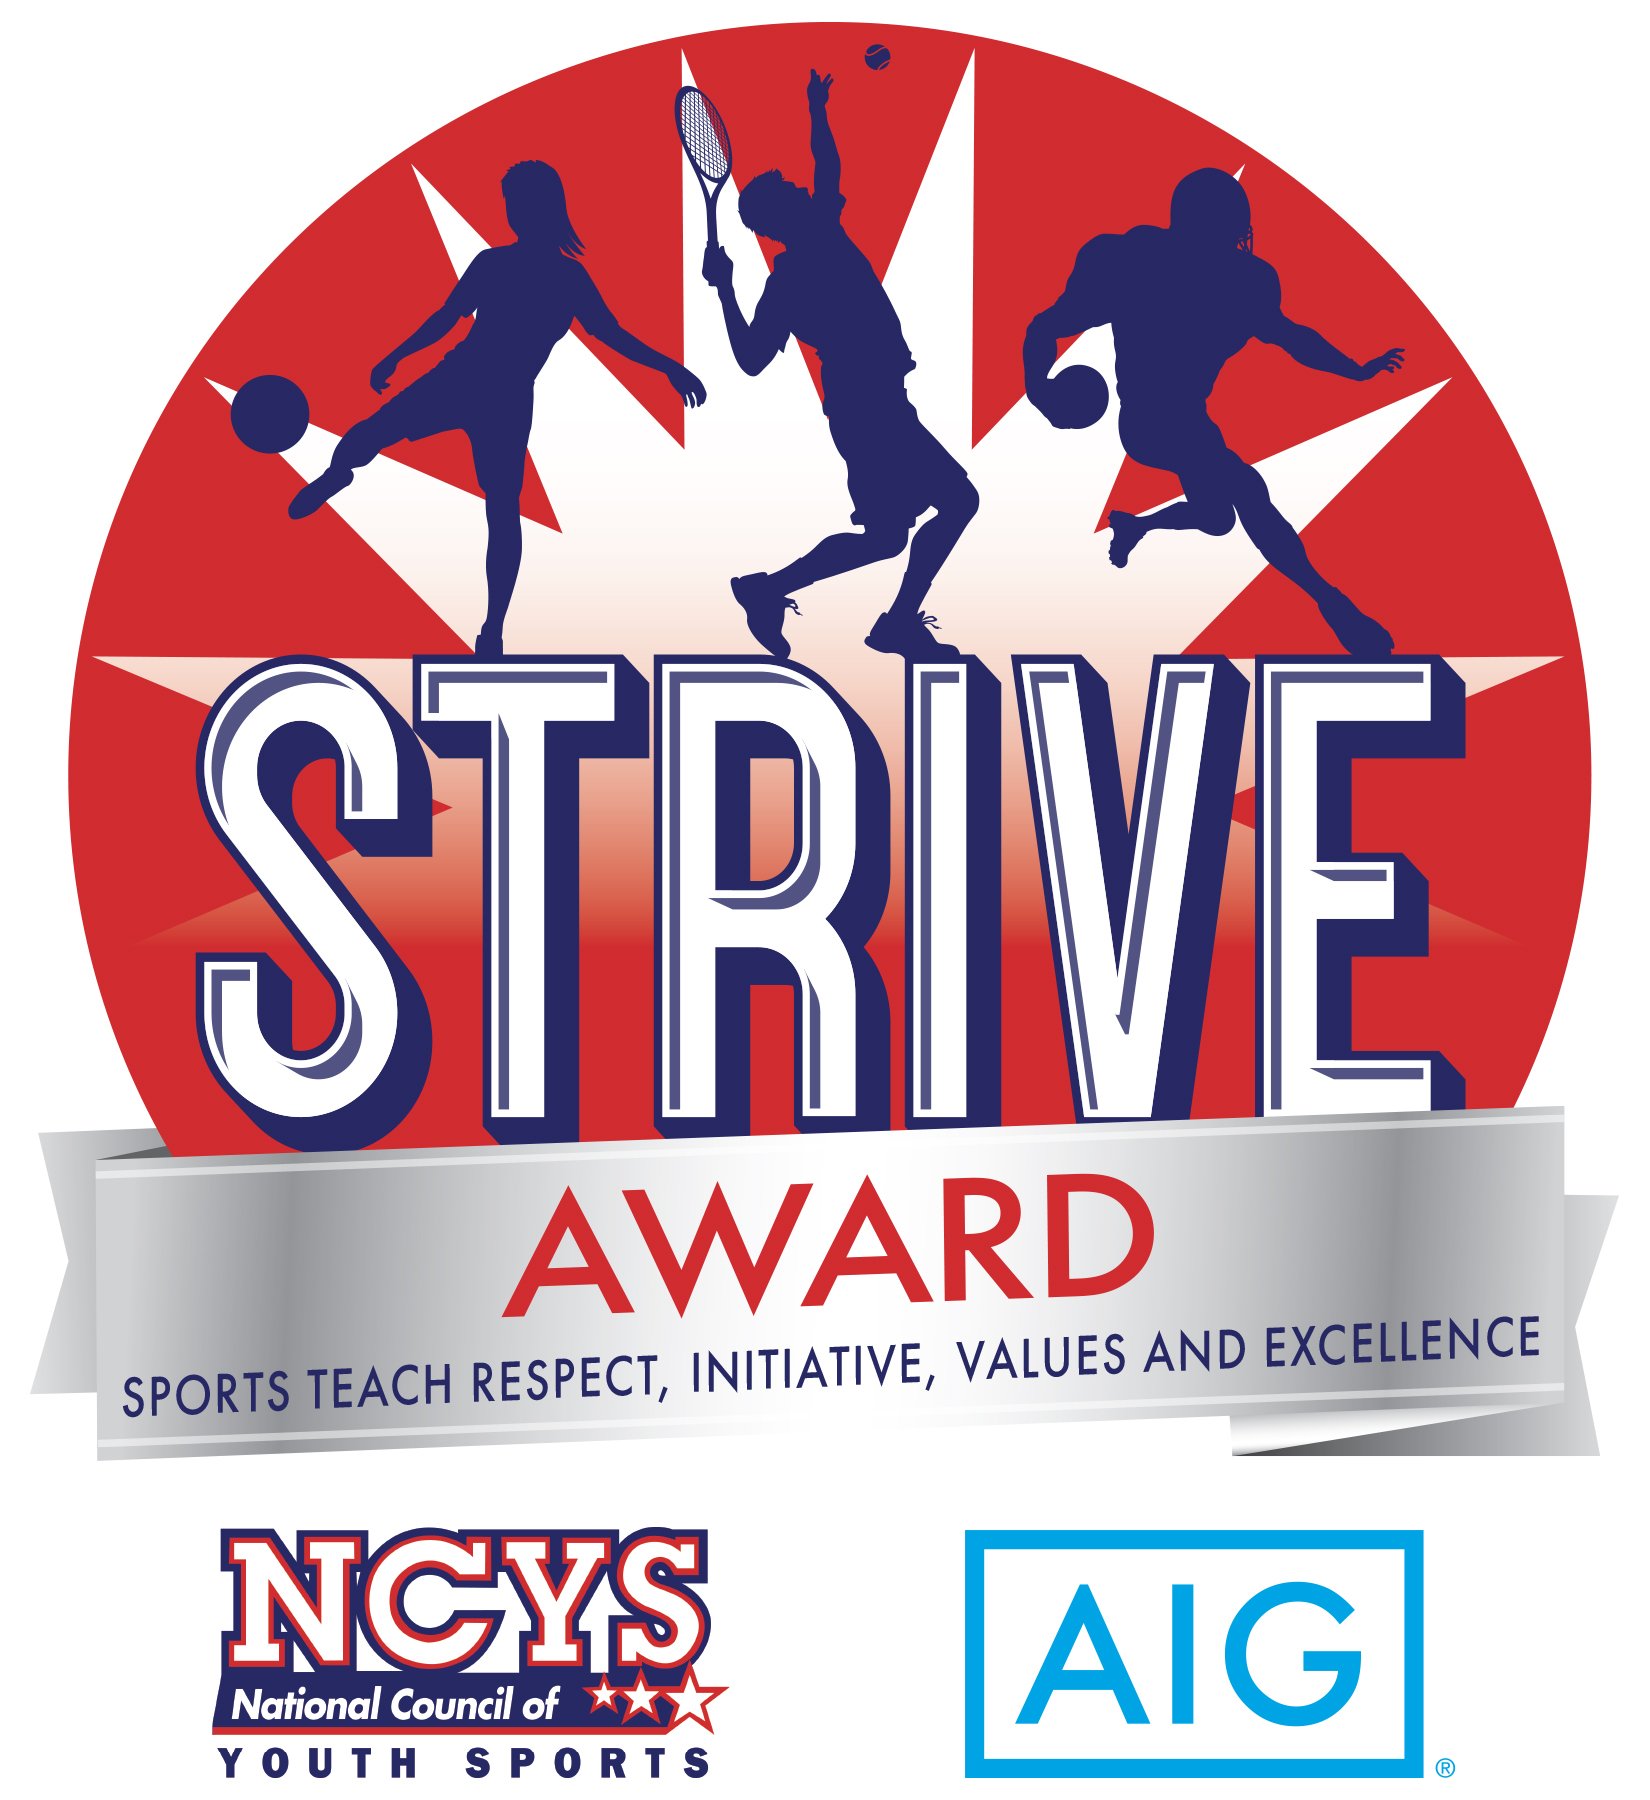 AIG & NCYS - Presenters of the STRIVE Award NCYS and AIG present the STRIVE...